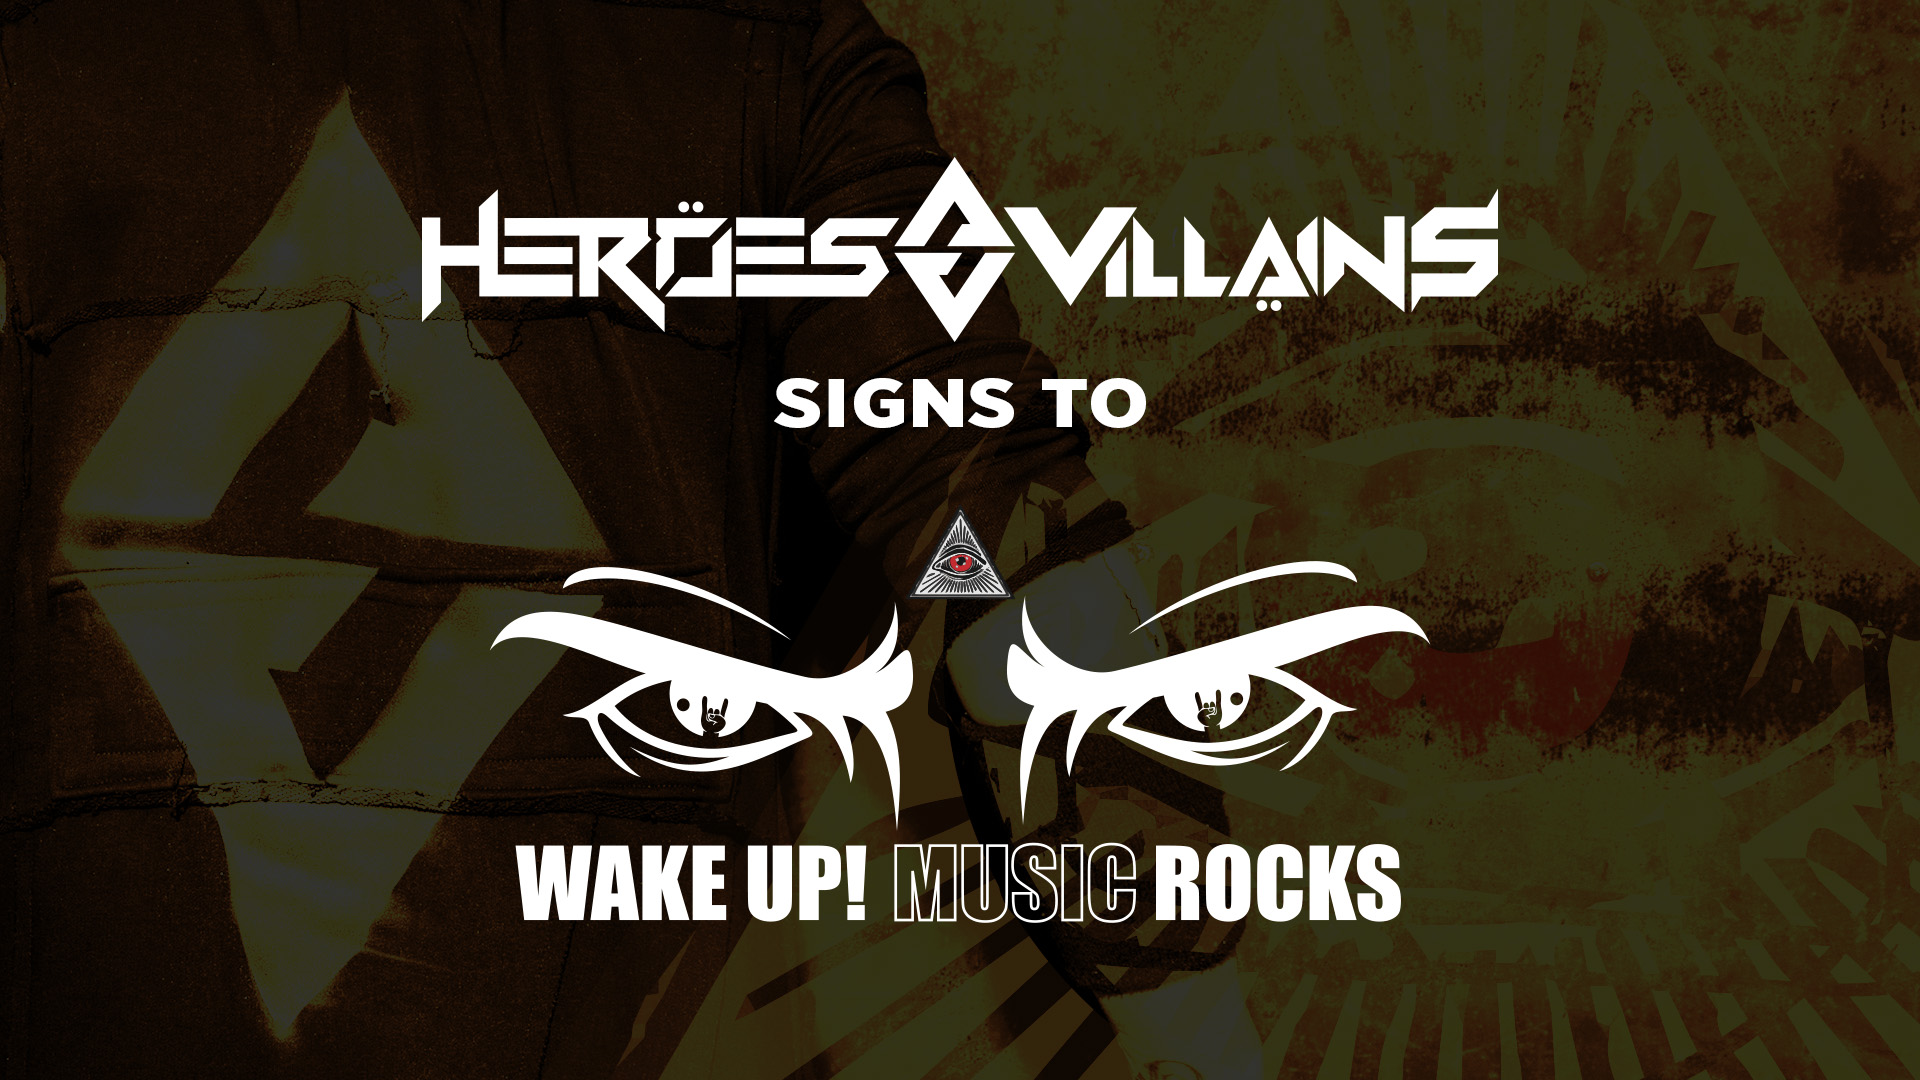 Heroes and Villains Signs with Wake Up! Music Rocks